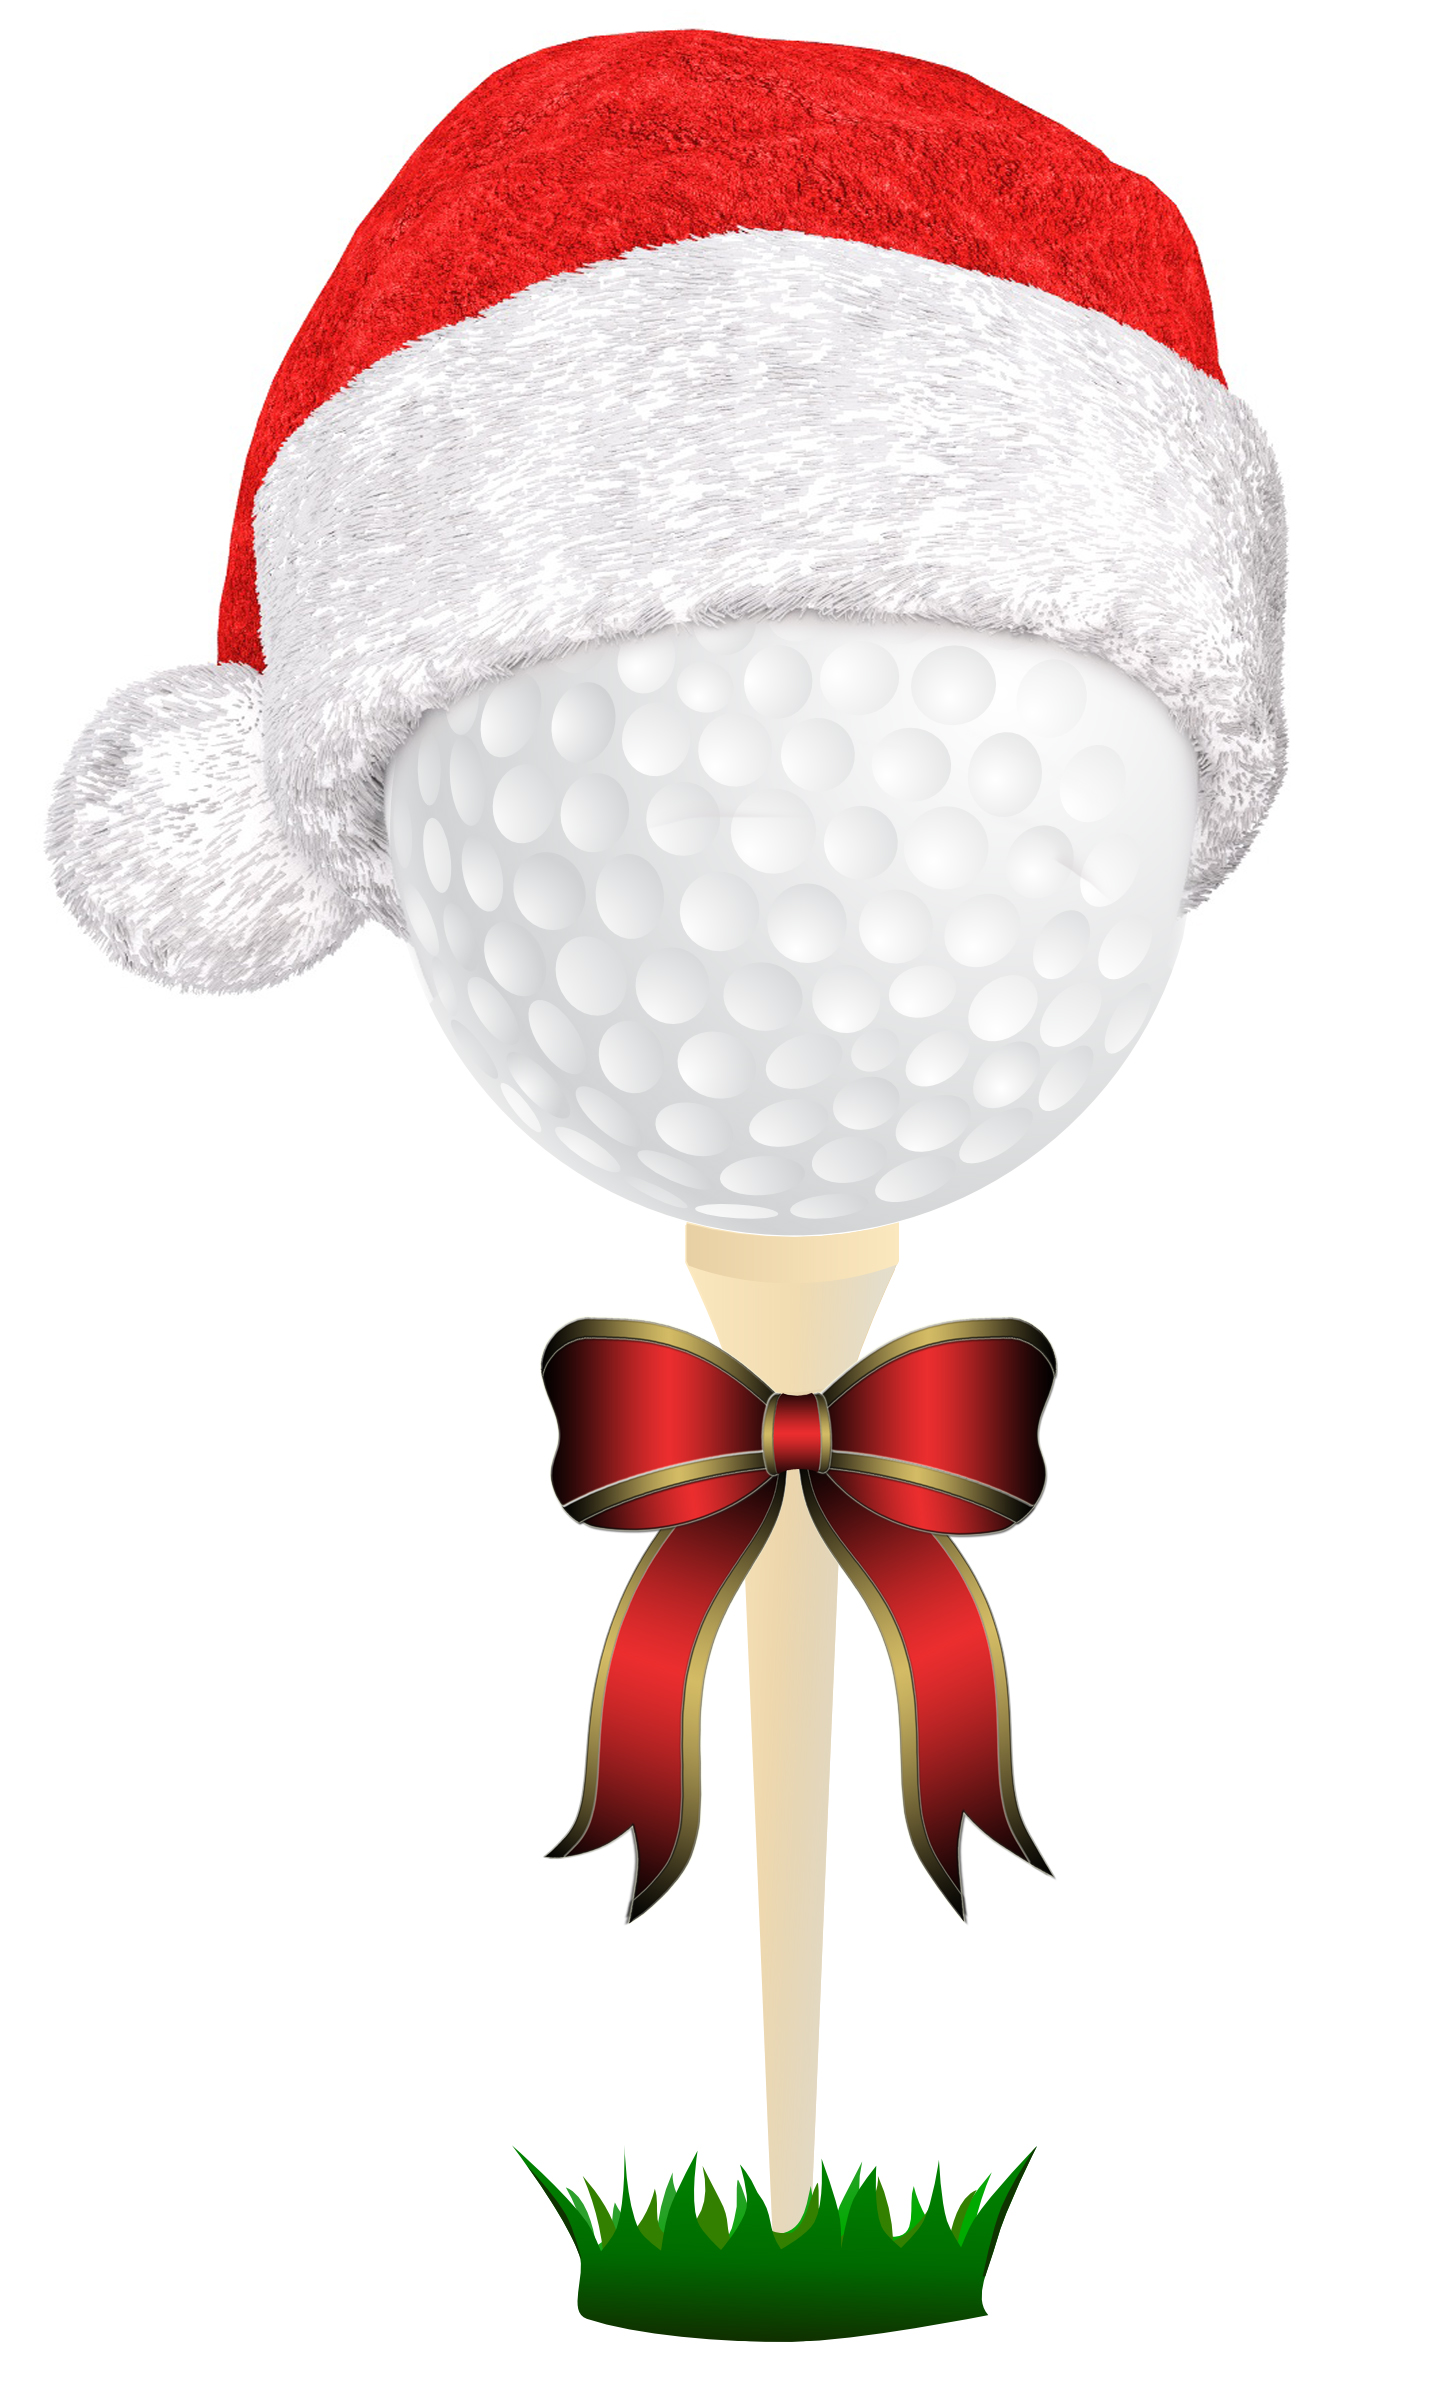 Christmas golf ideas | lessons with leslie